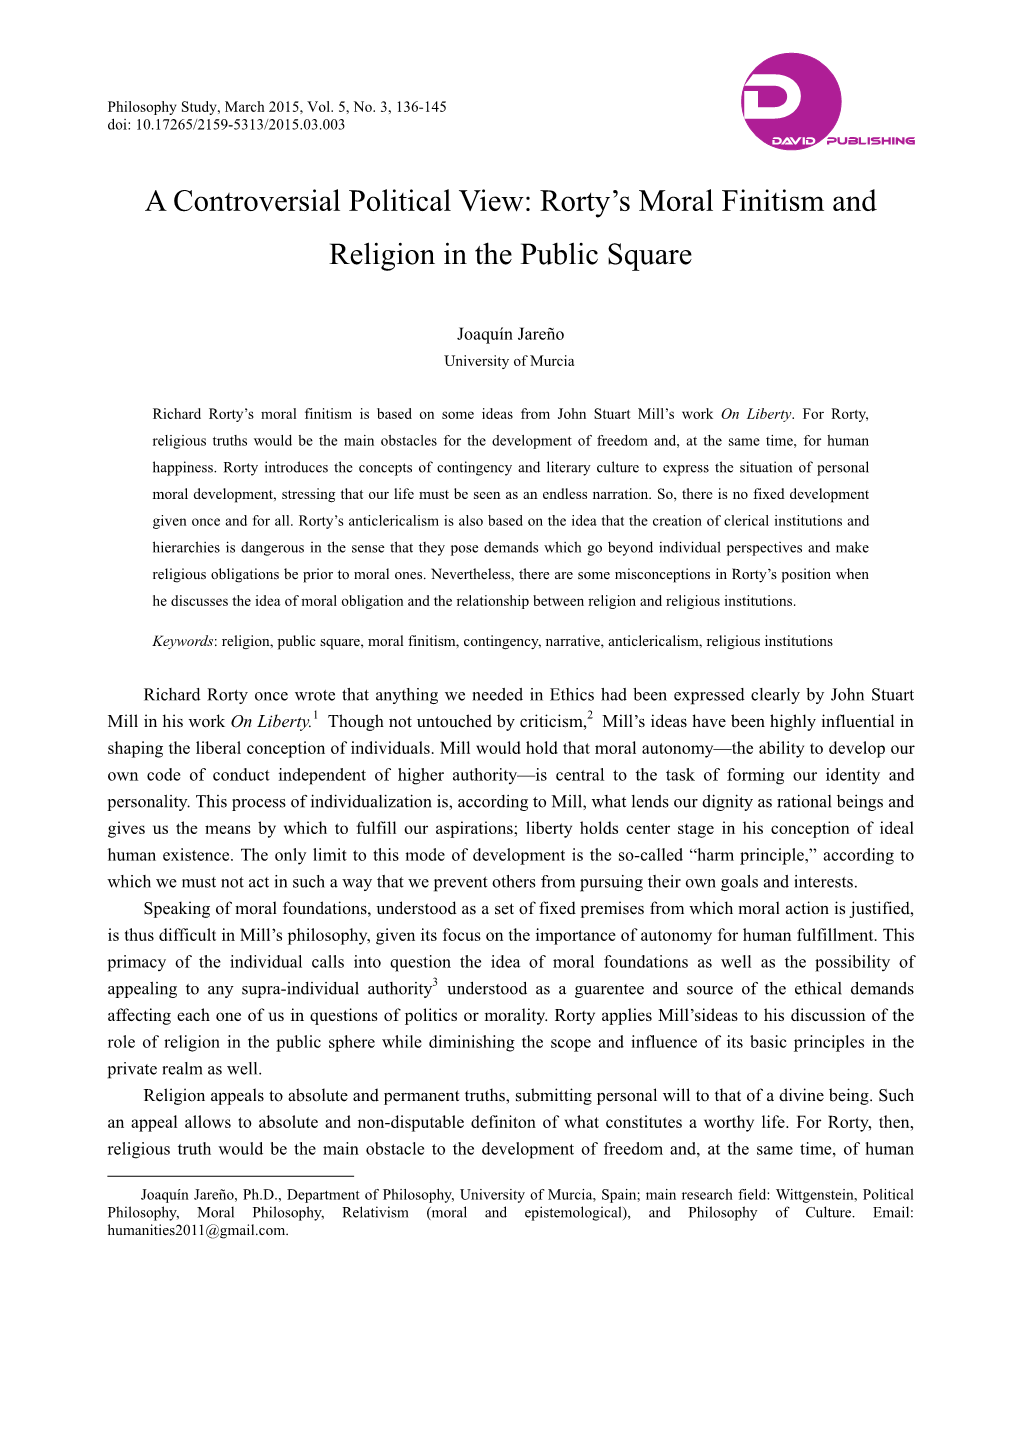 Rorty's Moral Finitism and Religion in the Public Square